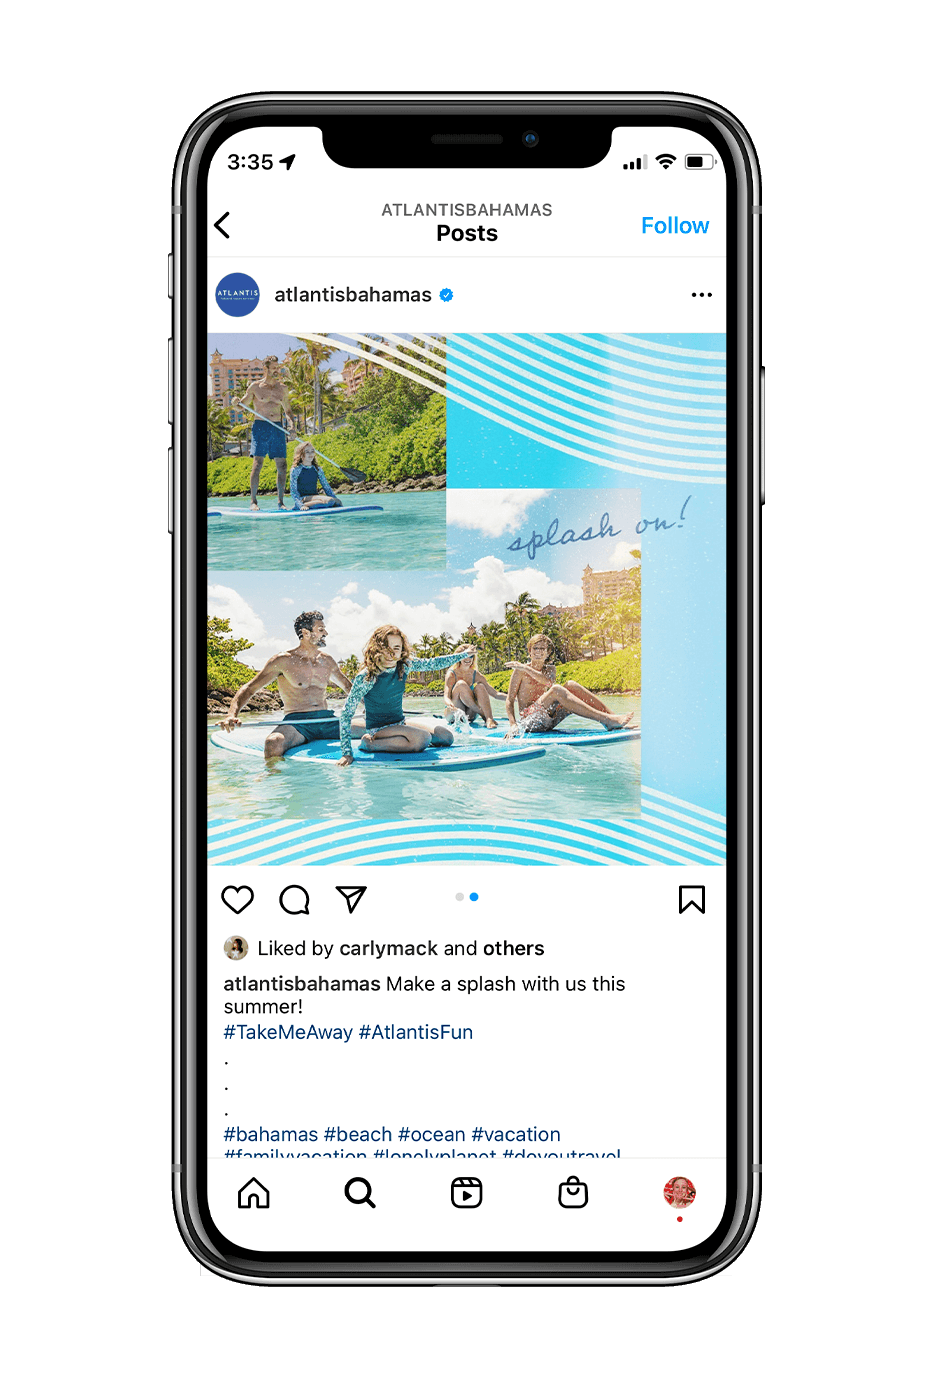 Mockup of iphone showing an example of an Atlantis Bahamas instagram post. The post reads 